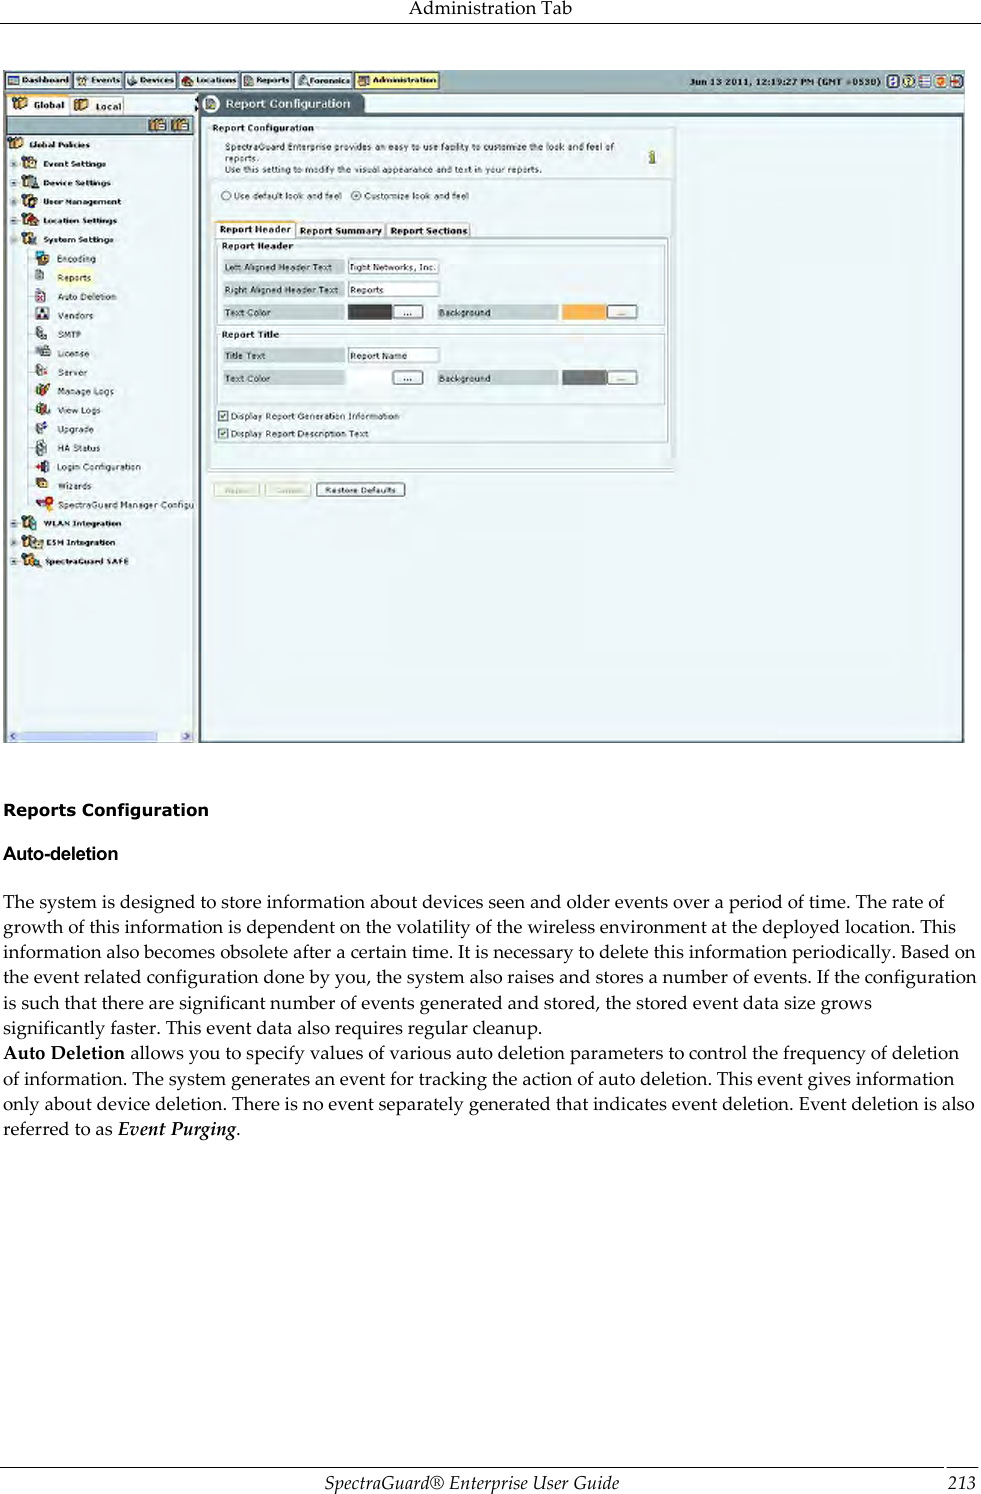 Administration Tab SpectraGuard®  Enterprise User Guide 213      Reports Configuration Auto-deletion The system is designed to store information about devices seen and older events over a period of time. The rate of growth of this information is dependent on the volatility of the wireless environment at the deployed location. This information also becomes obsolete after a certain time. It is necessary to delete this information periodically. Based on the event related configuration done by you, the system also raises and stores a number of events. If the configuration is such that there are significant number of events generated and stored, the stored event data size grows significantly faster. This event data also requires regular cleanup. Auto Deletion allows you to specify values of various auto deletion parameters to control the frequency of deletion of information. The system generates an event for tracking the action of auto deletion. This event gives information only about device deletion. There is no event separately generated that indicates event deletion. Event deletion is also referred to as Event Purging. 